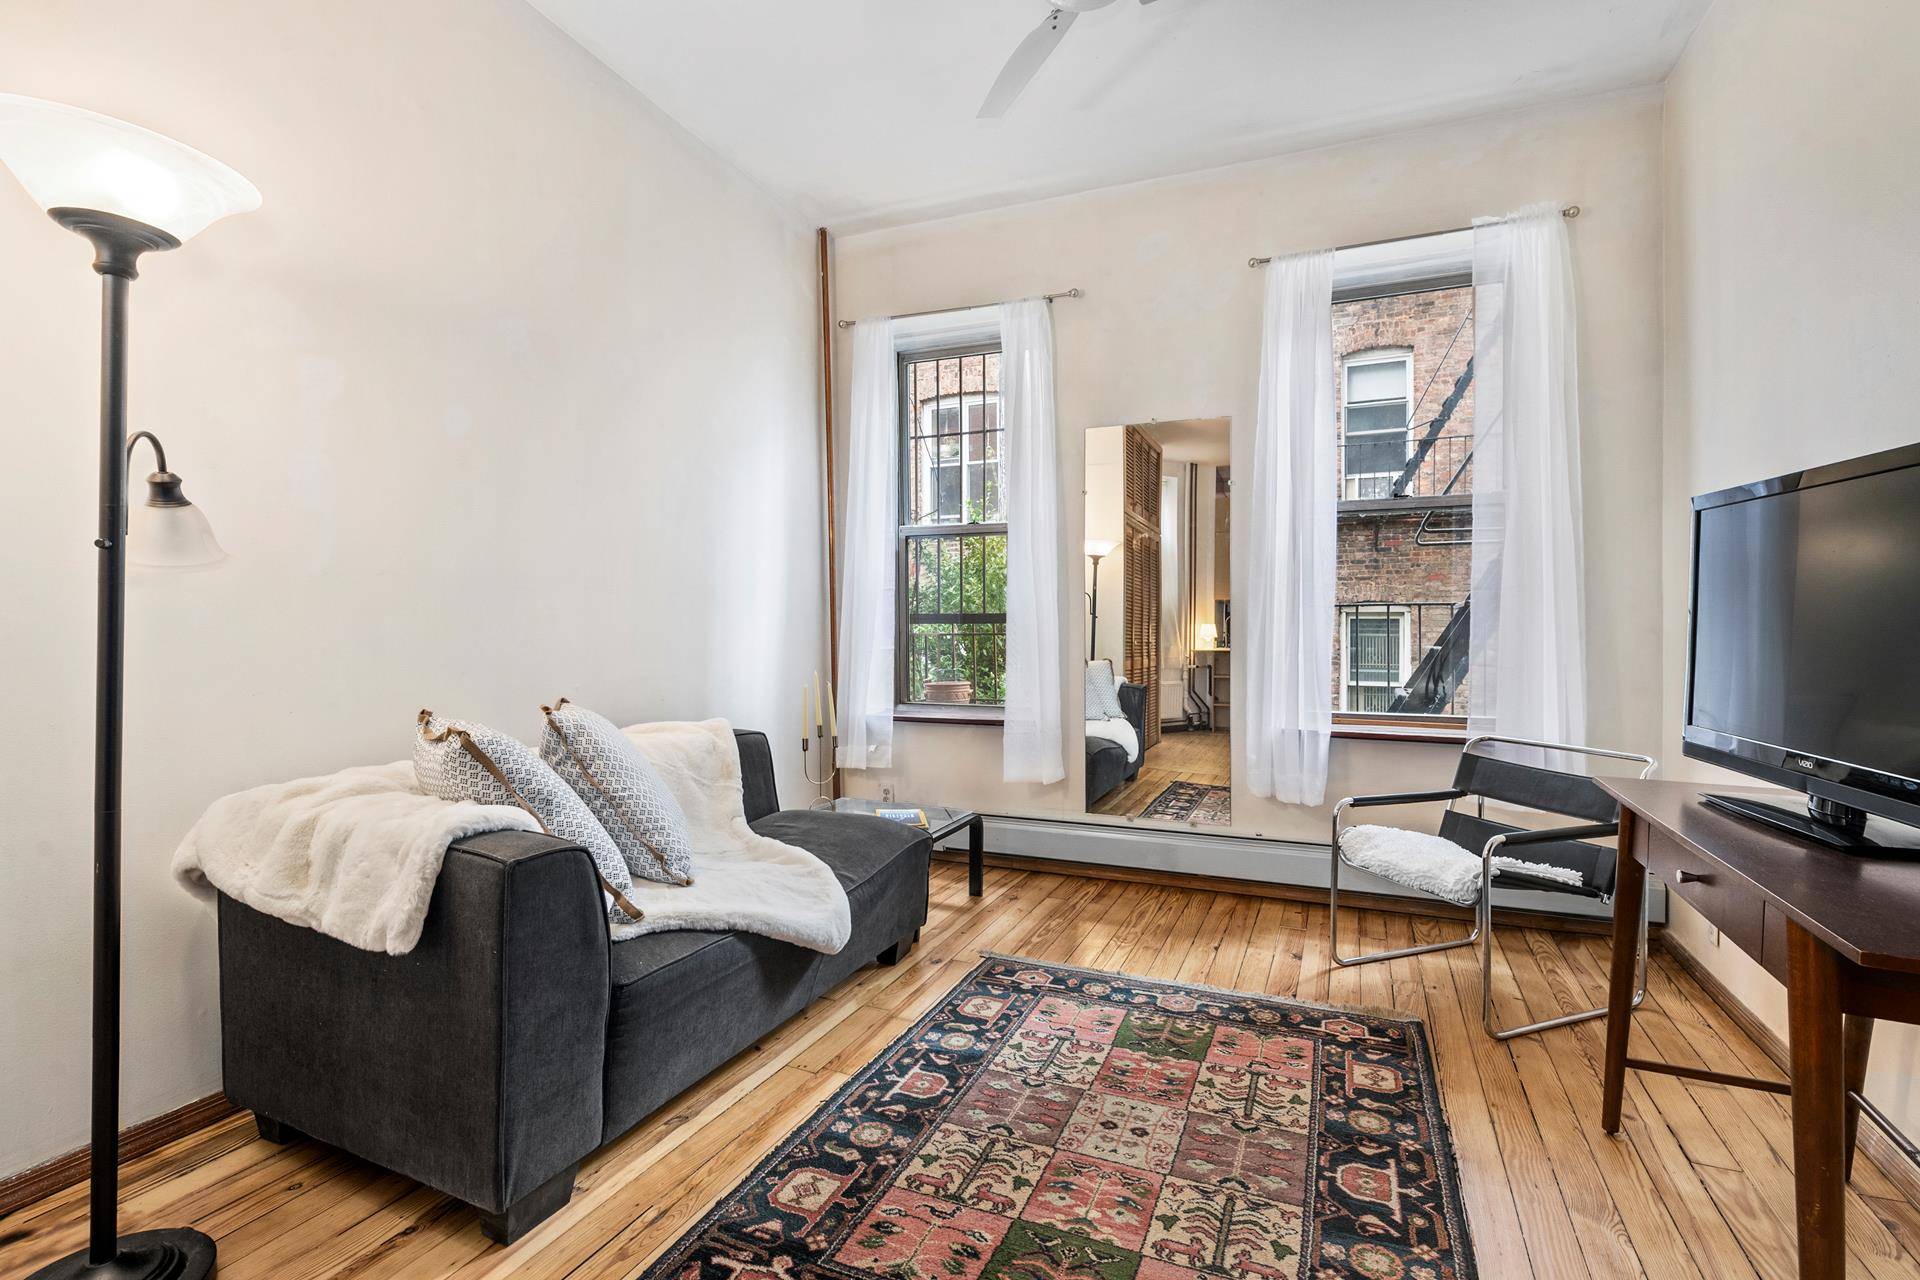 Charming and spacious 2 bedroom residence nestled in the Heart of the East Village.